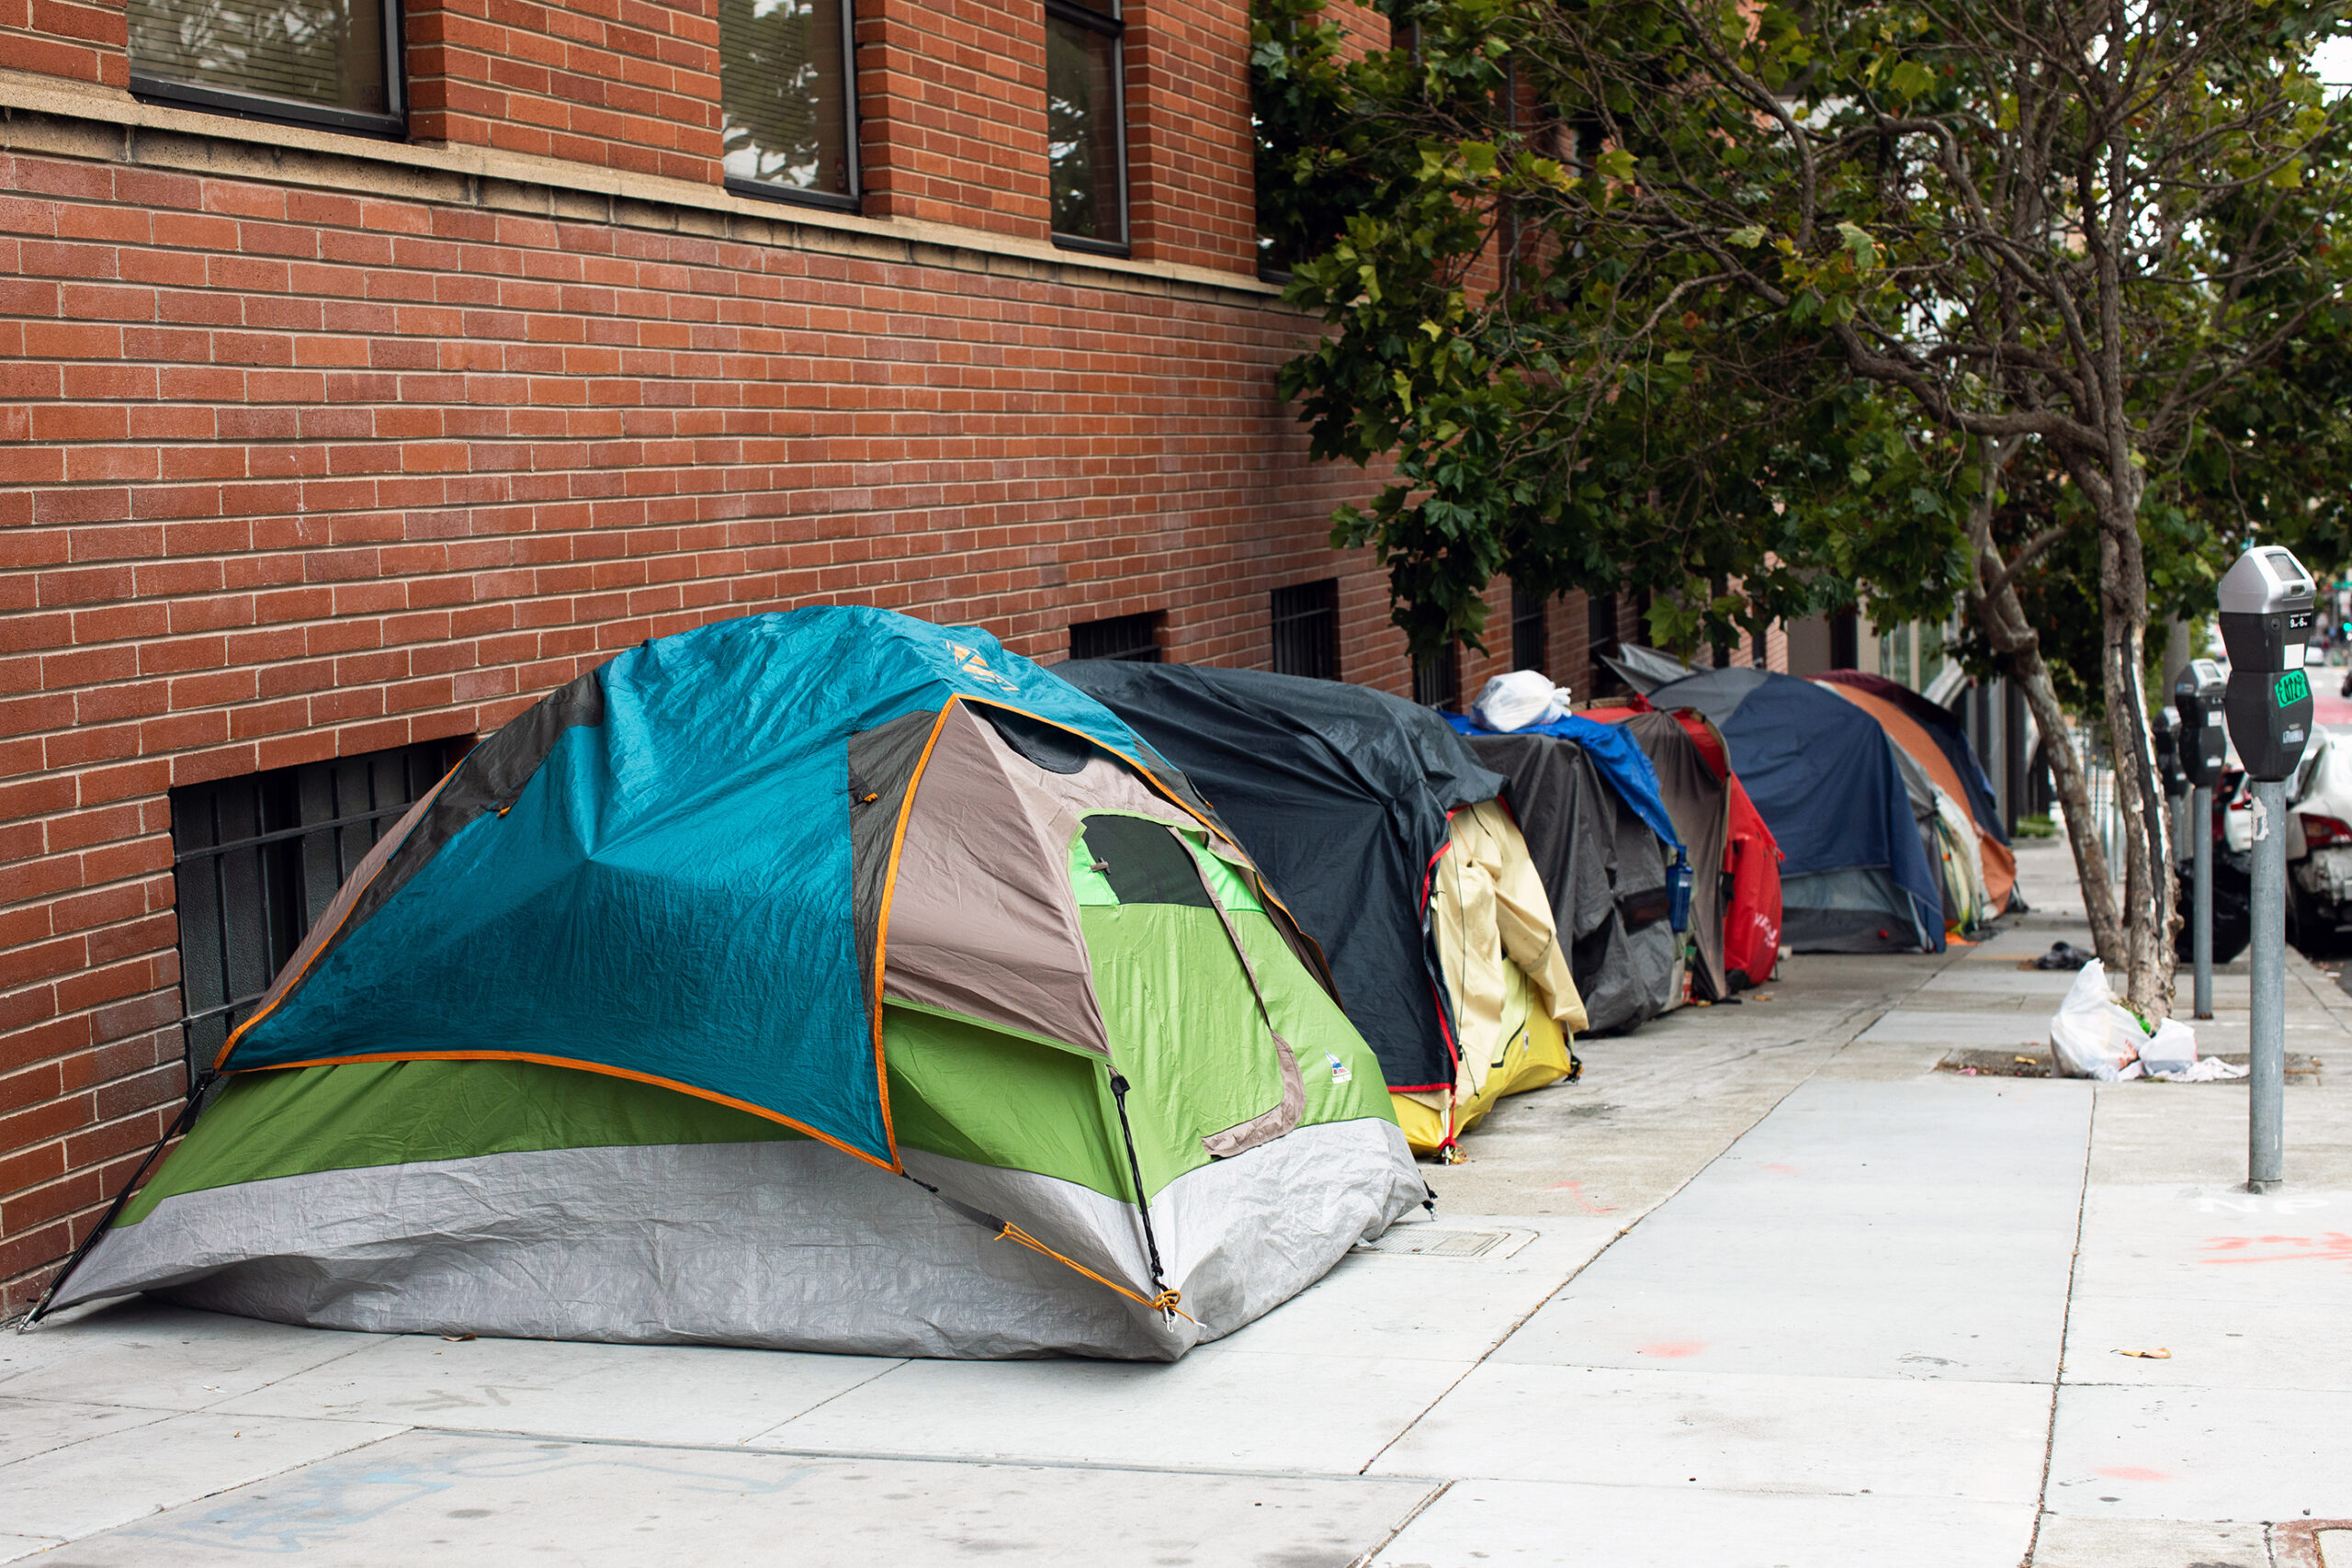 Ask The Standard: How Many of San Francisco’s Homeless People Are From the City?